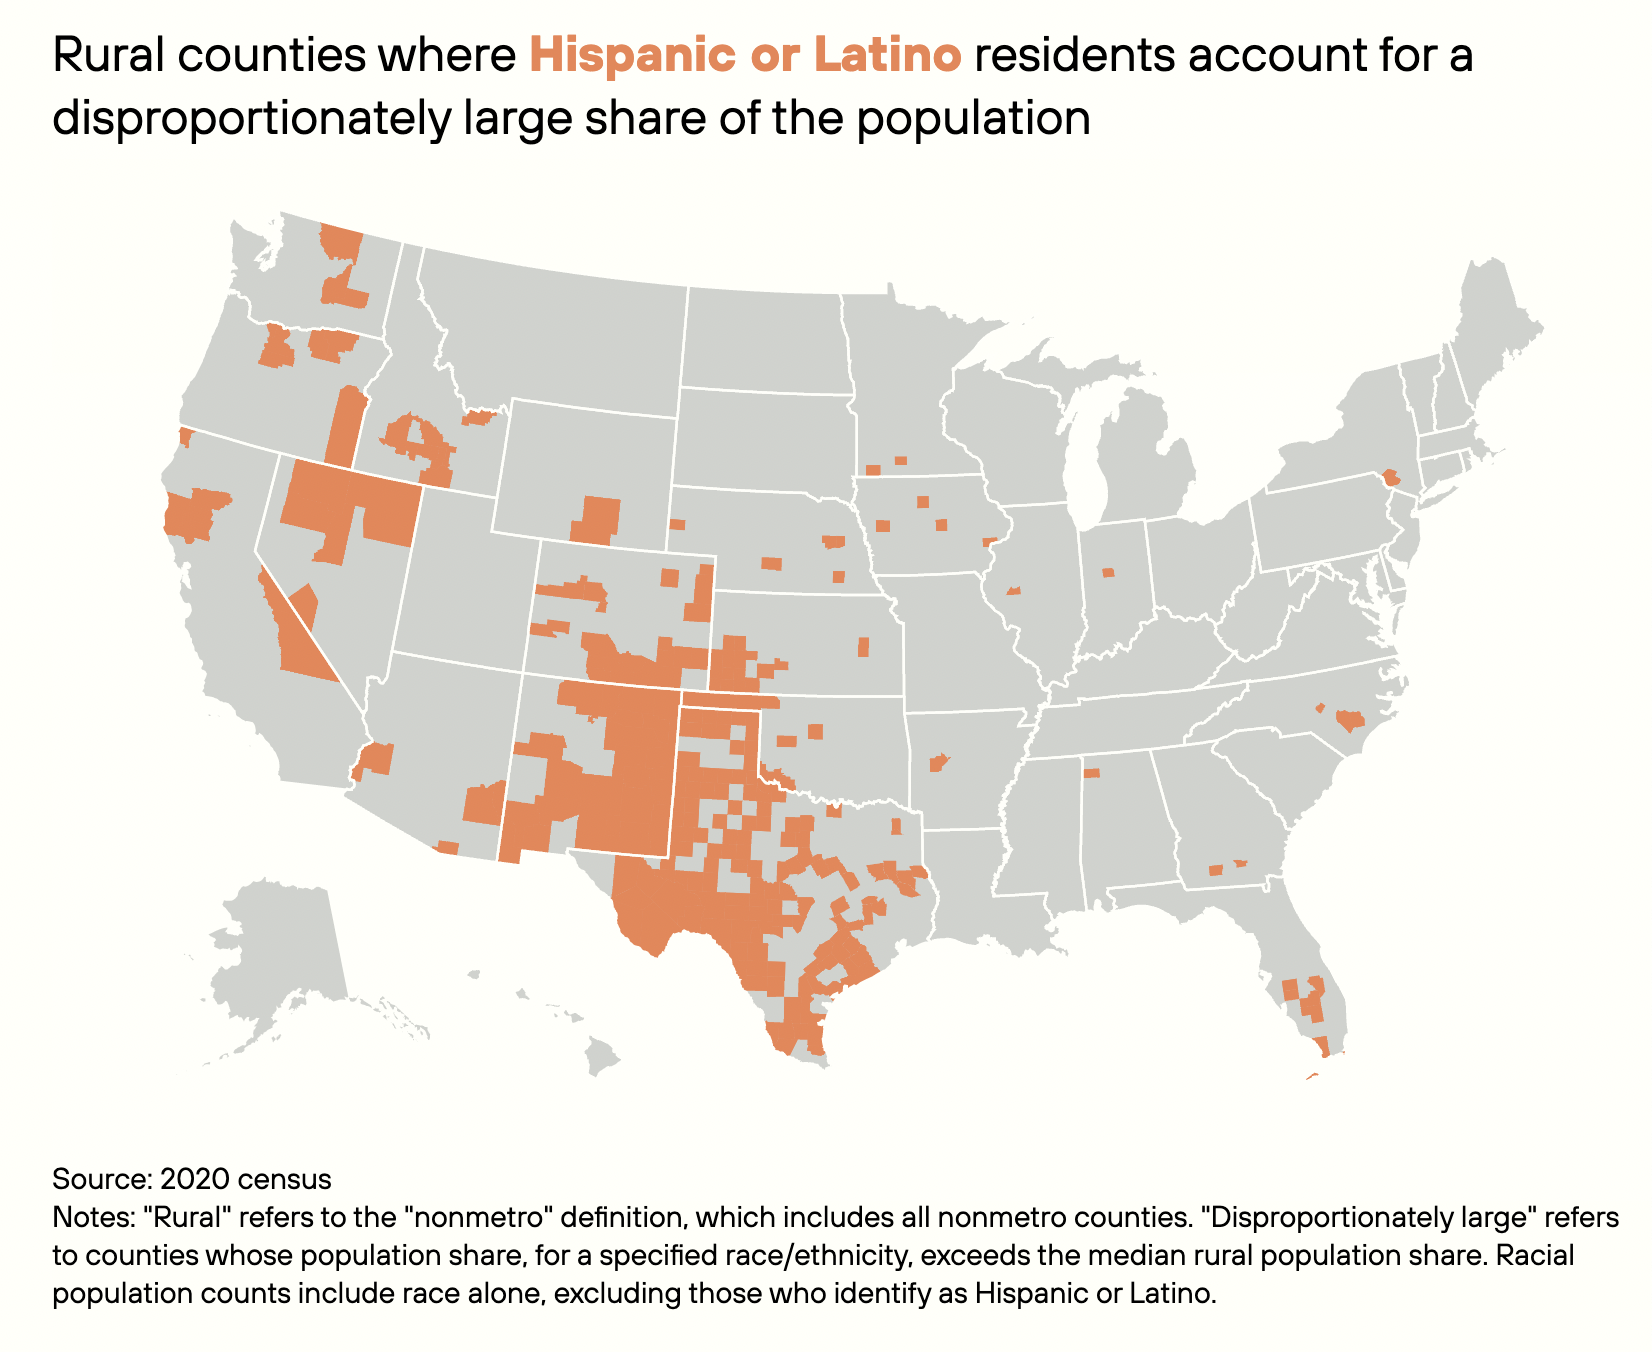 Map of rural counties where Hispanic or Latino residents account for a disproportionately large share of the population